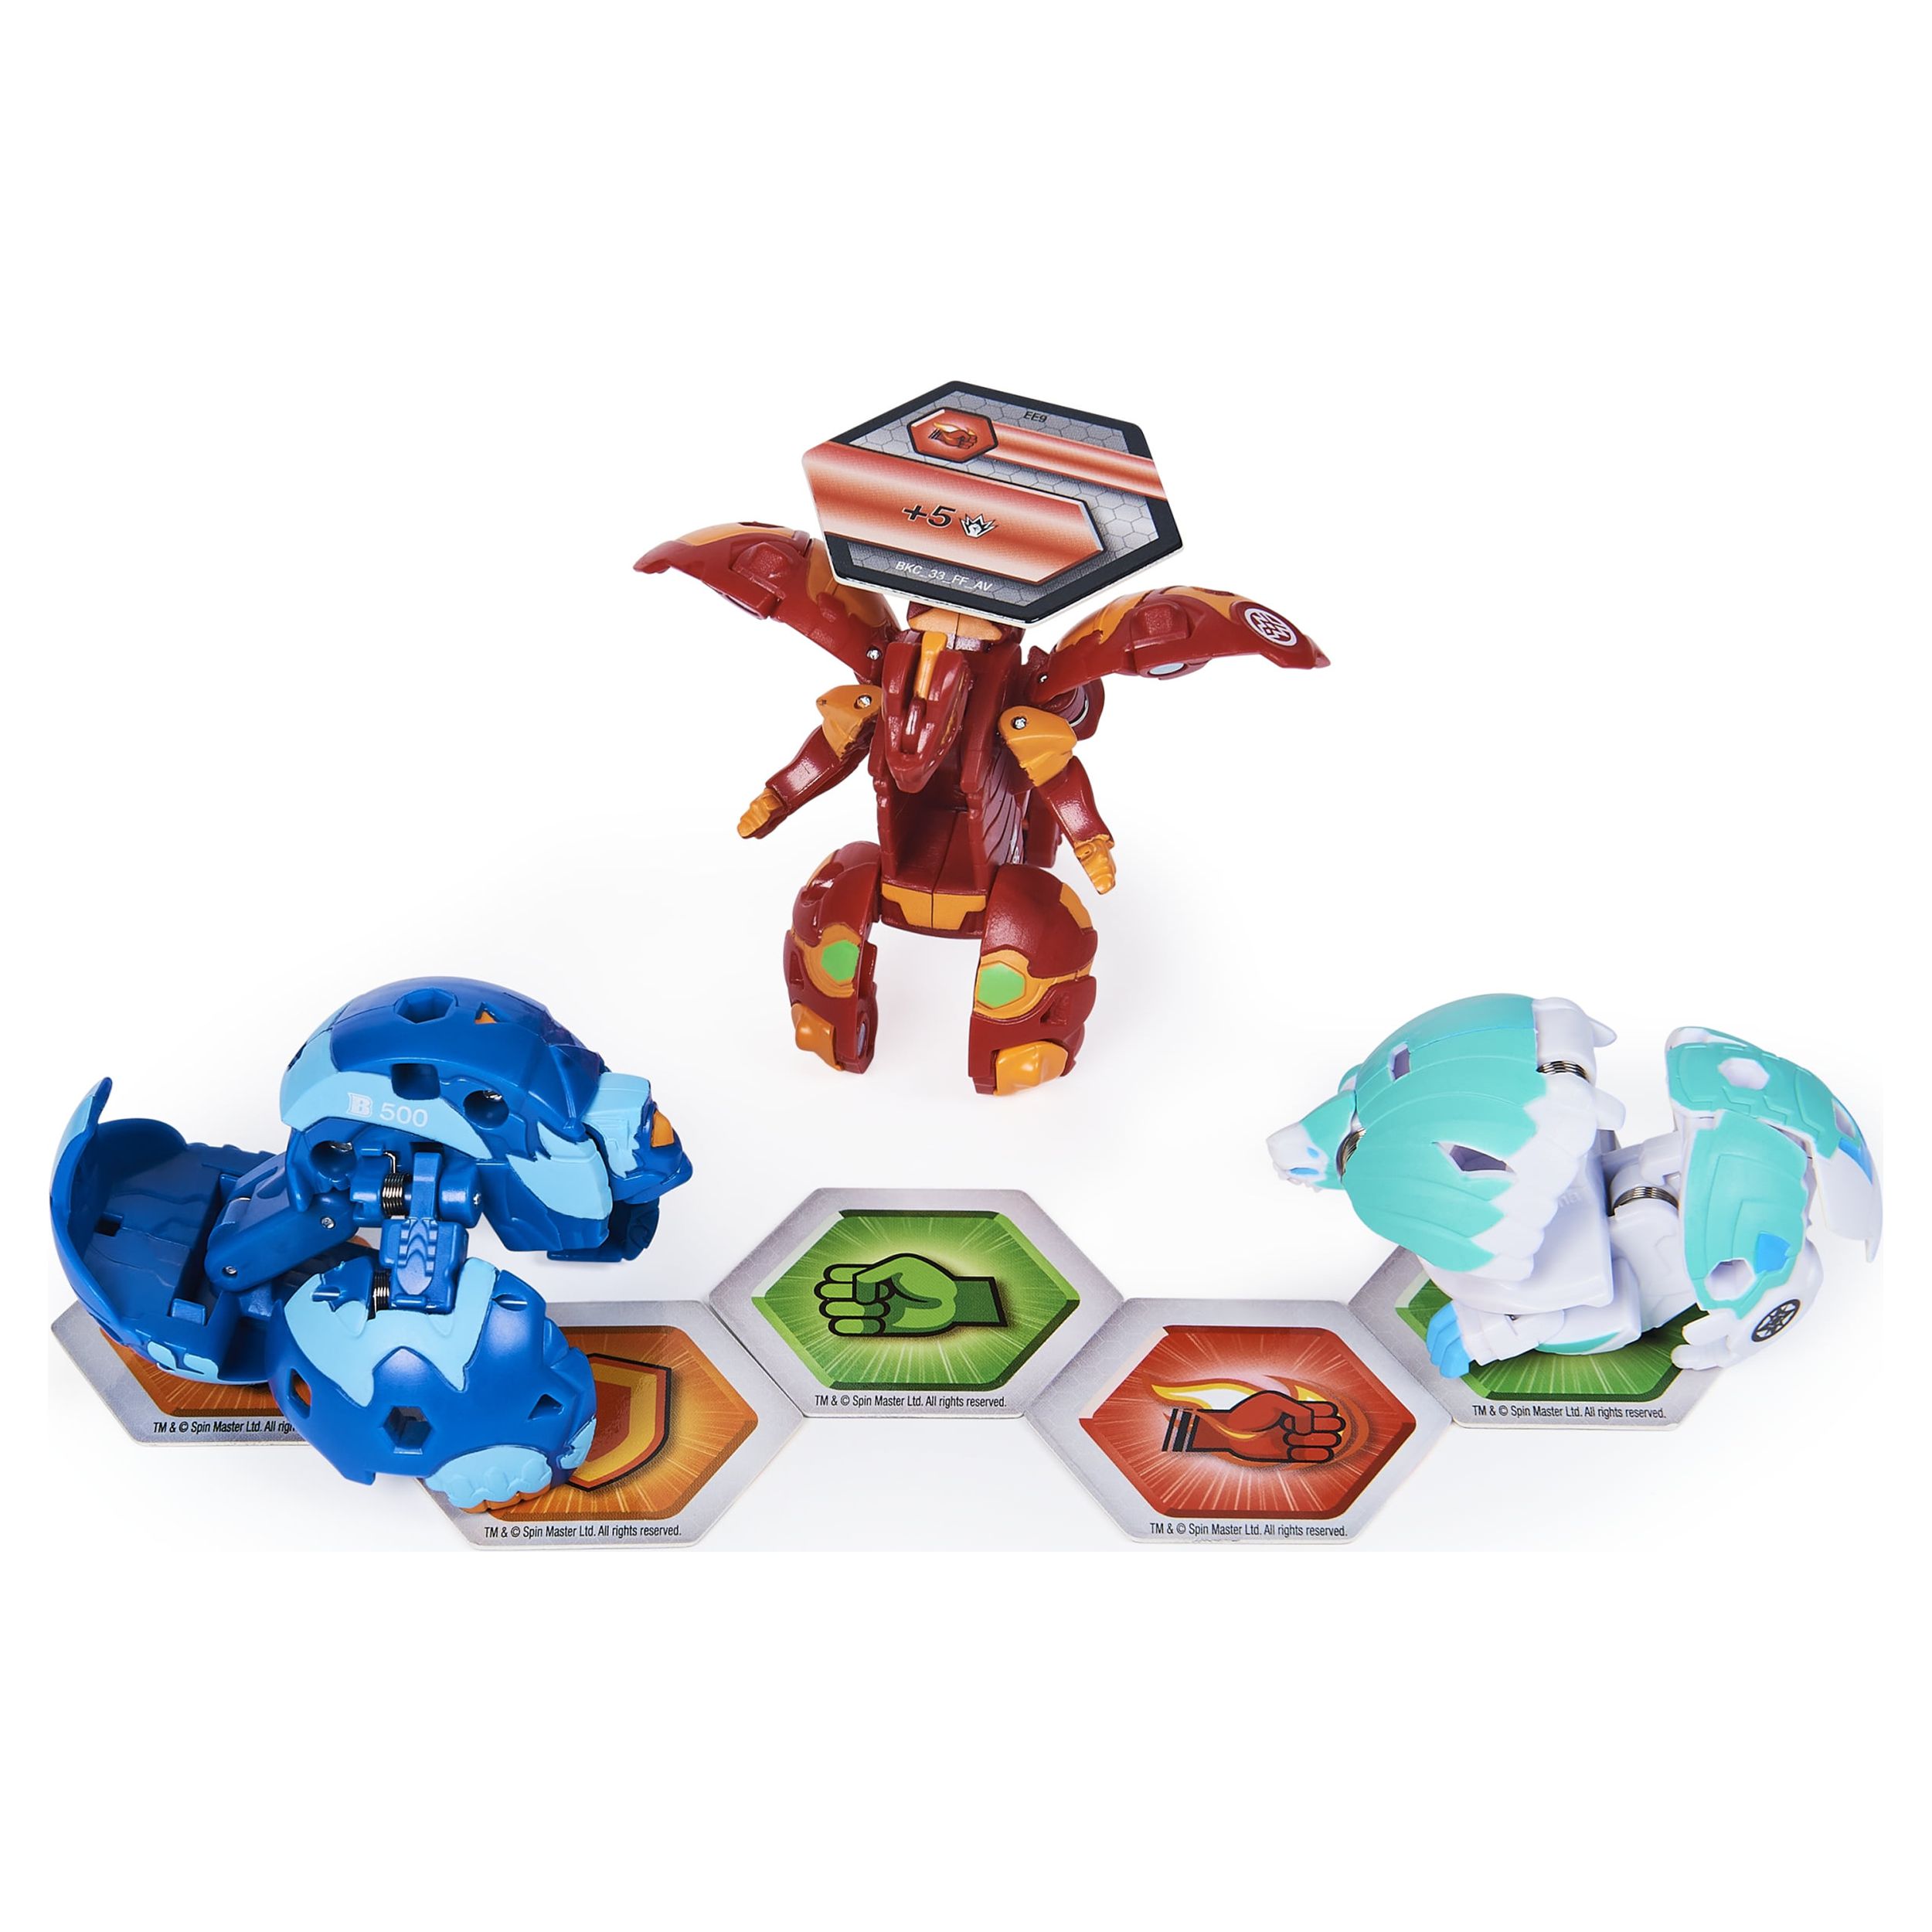 Bakugan Starter Pack 3-Pack, Dragonoid Ultra, Armored Alliance Collectible Action Figures - image 3 of 5